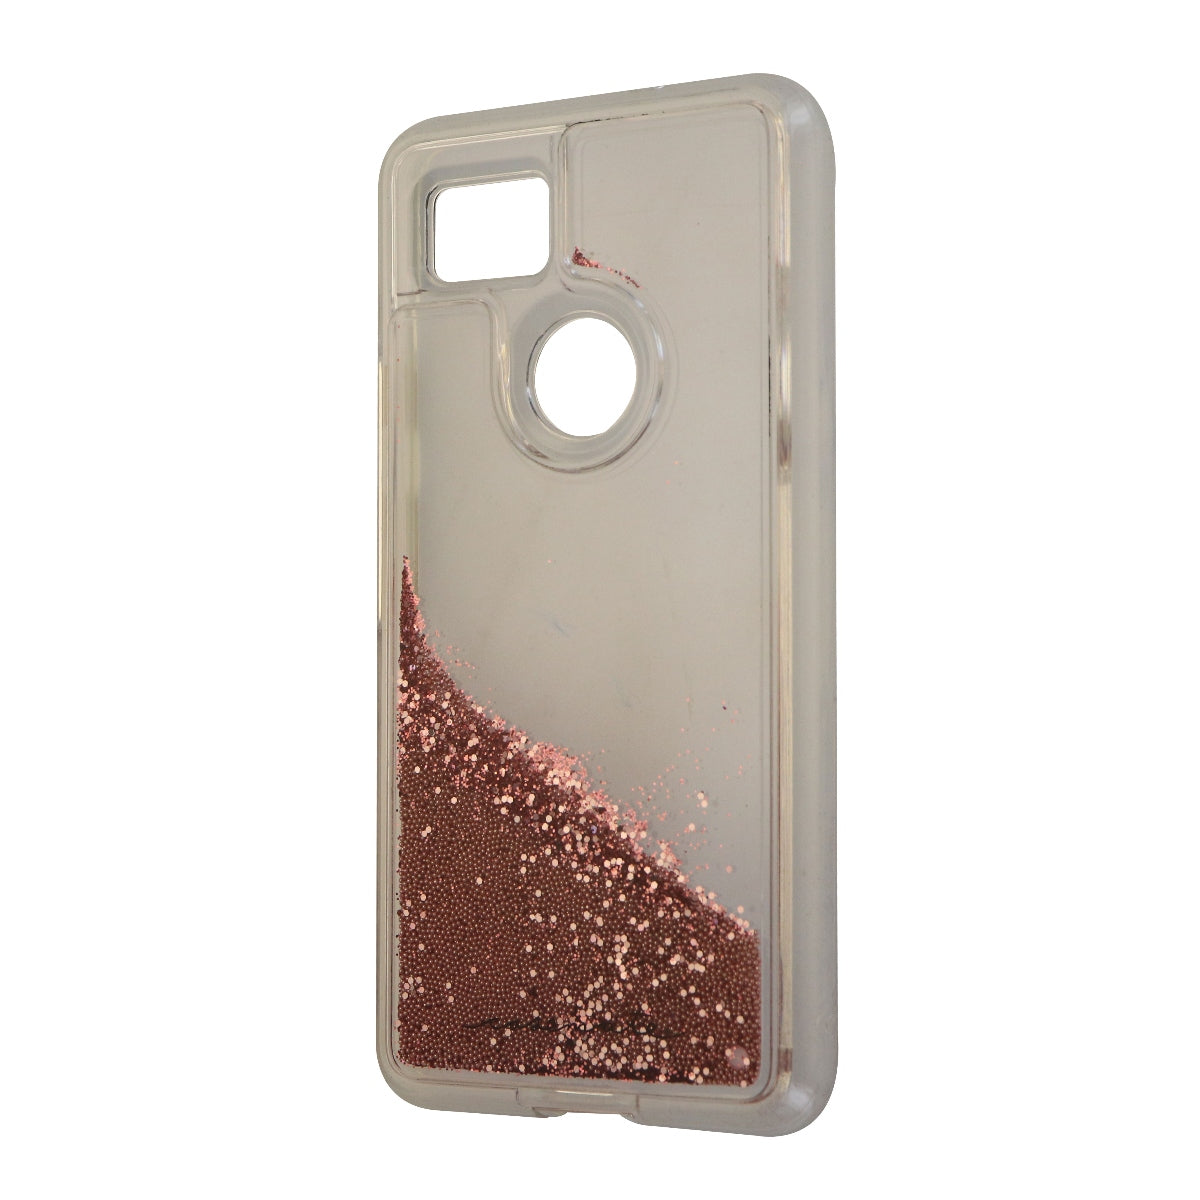 Case-Mate Liquid Waterfall Case for Google Pixel 2 XL - Clear/Pink Glitter Cell Phone - Cases, Covers & Skins Case-Mate    - Simple Cell Bulk Wholesale Pricing - USA Seller